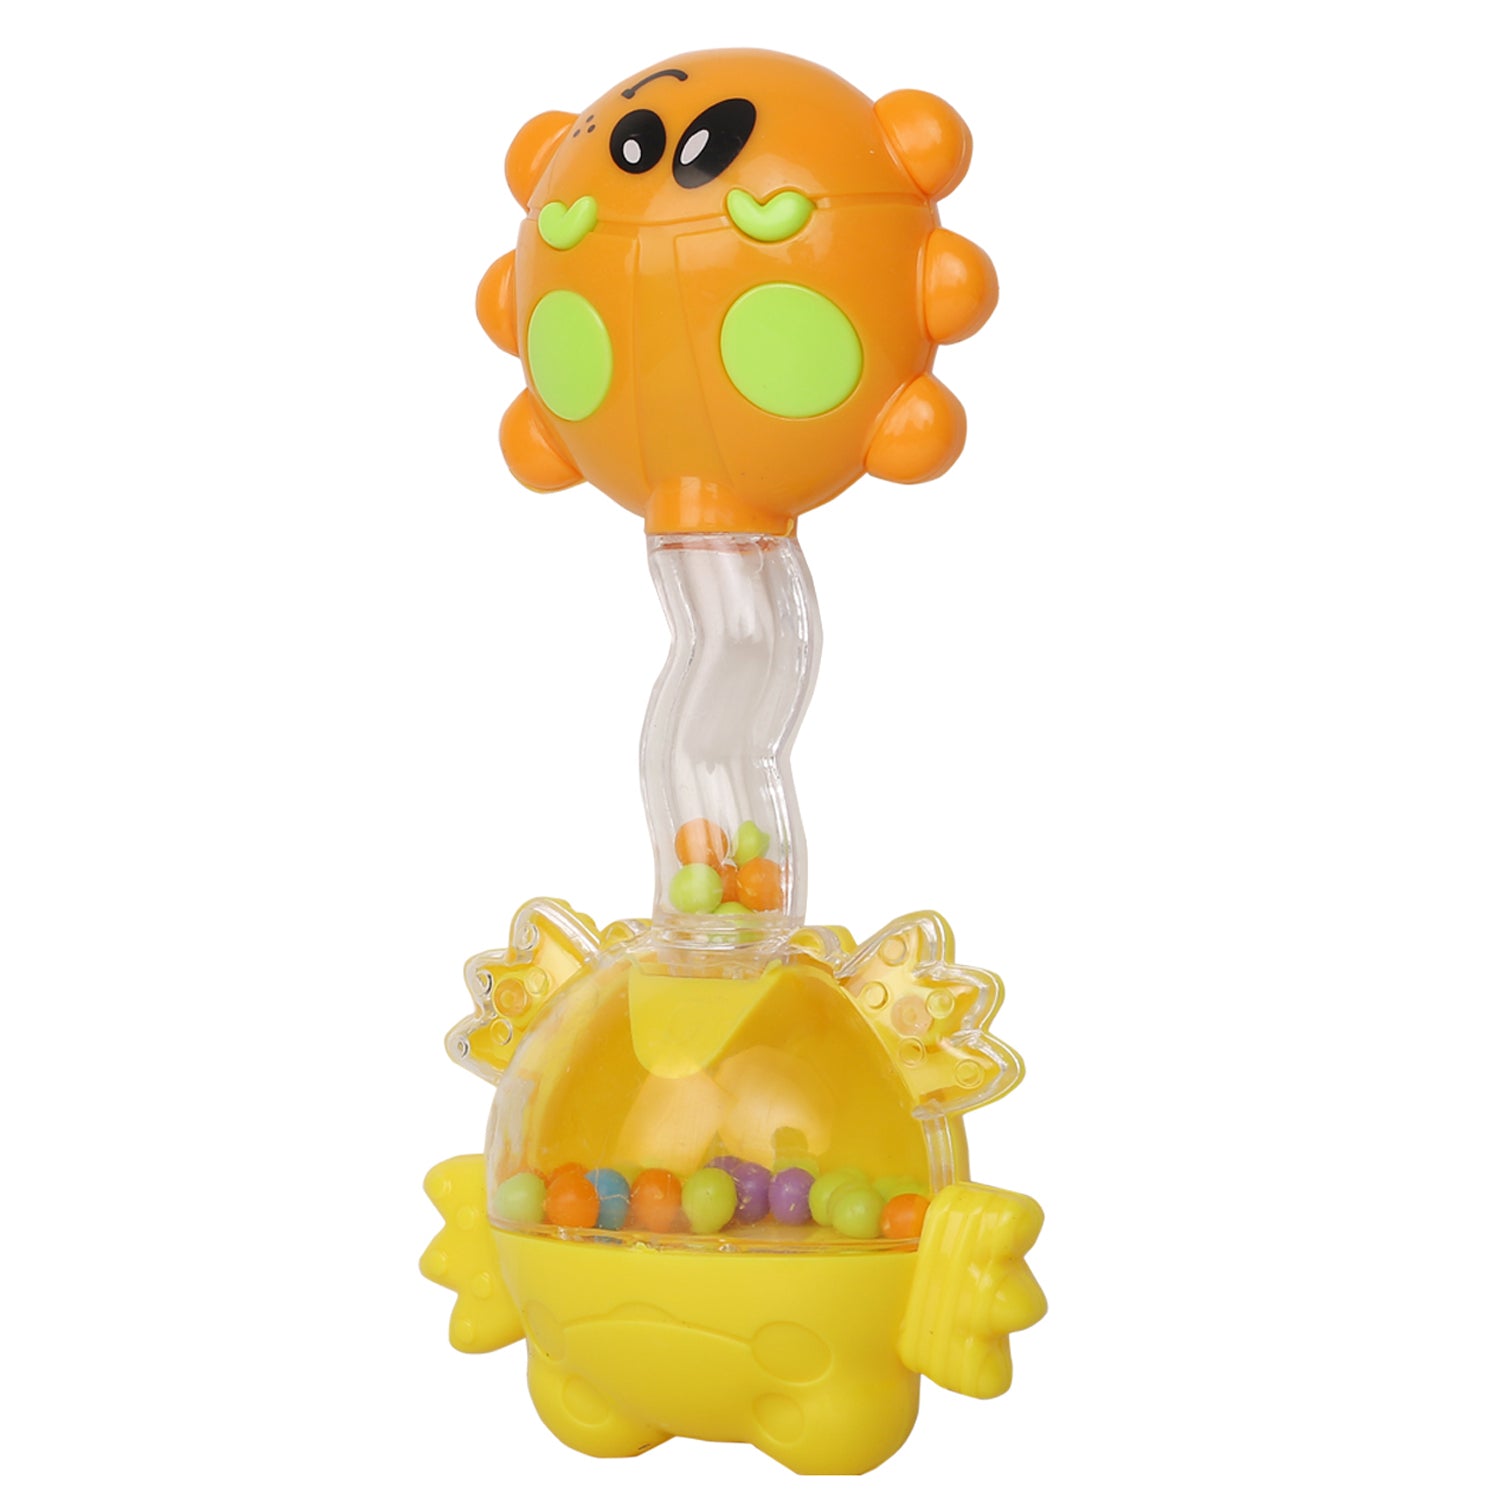 Fun-filled Multicolour Rattle Toy - Baby Moo